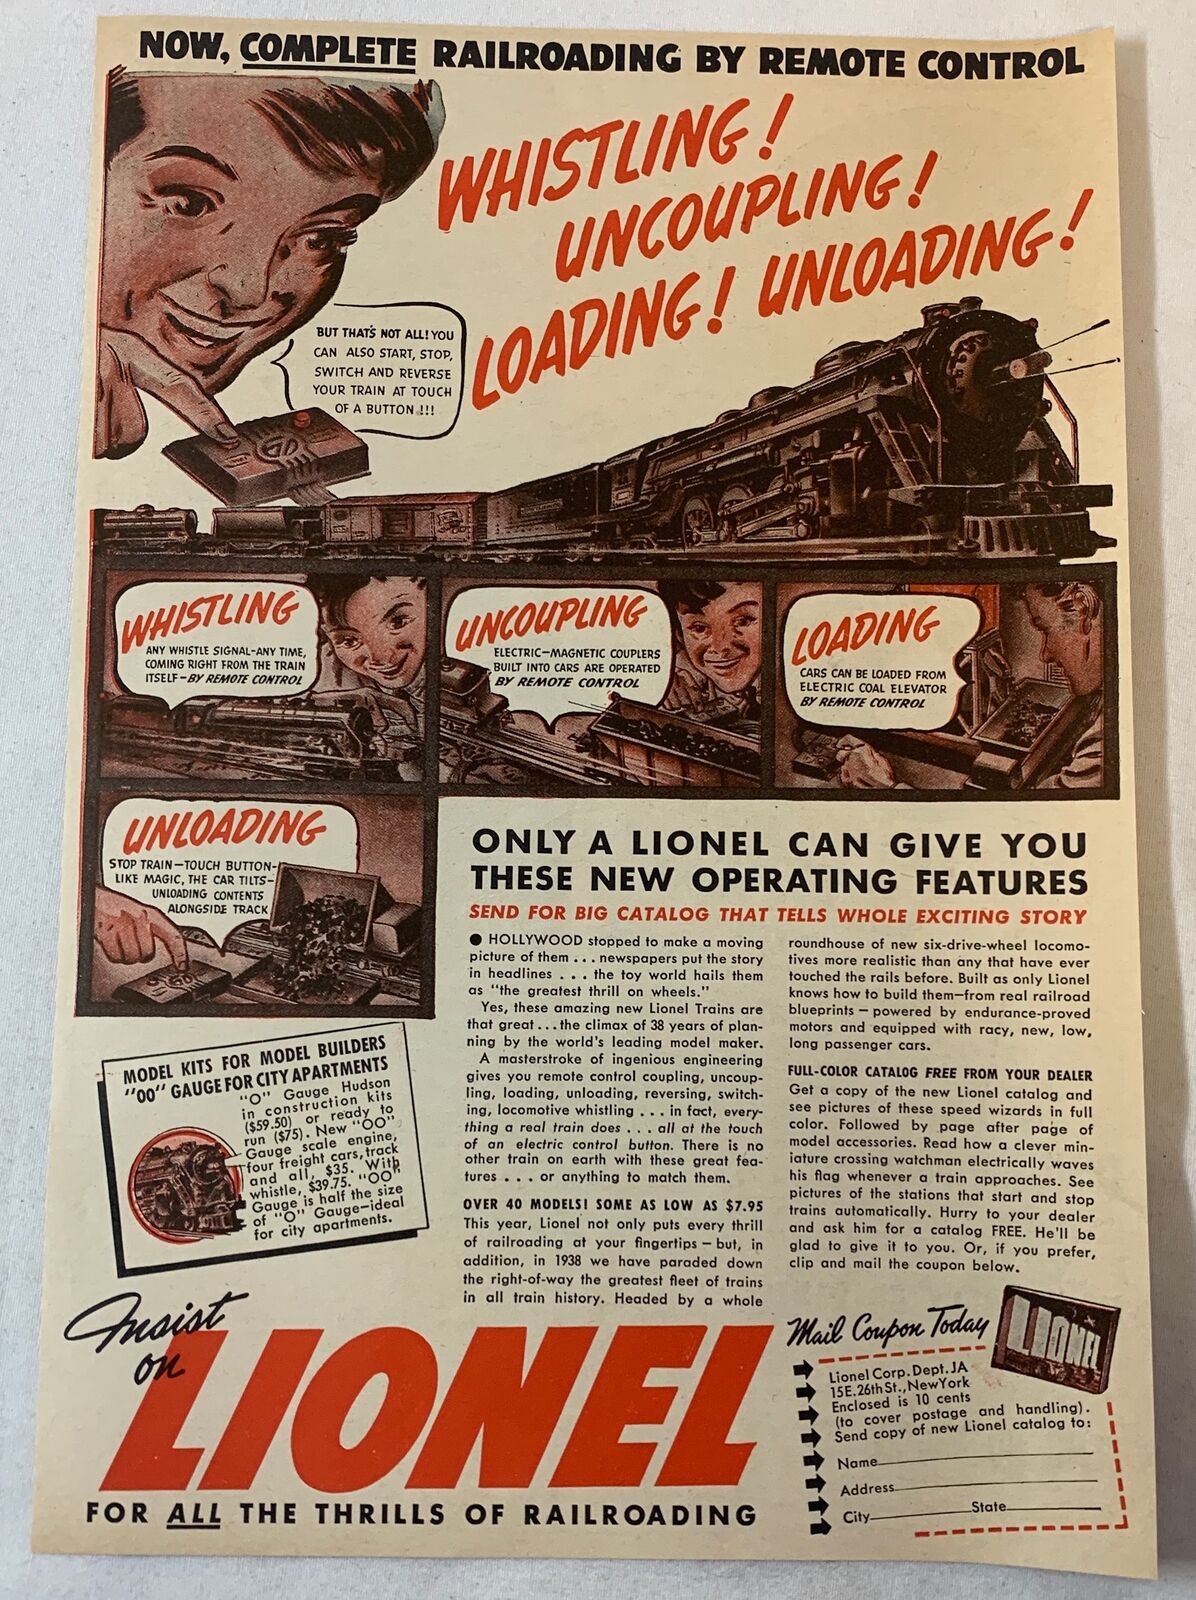 1938 LIONEL MODEL TRAINS ad ~ Whistling Uncoupling Loading Unloading